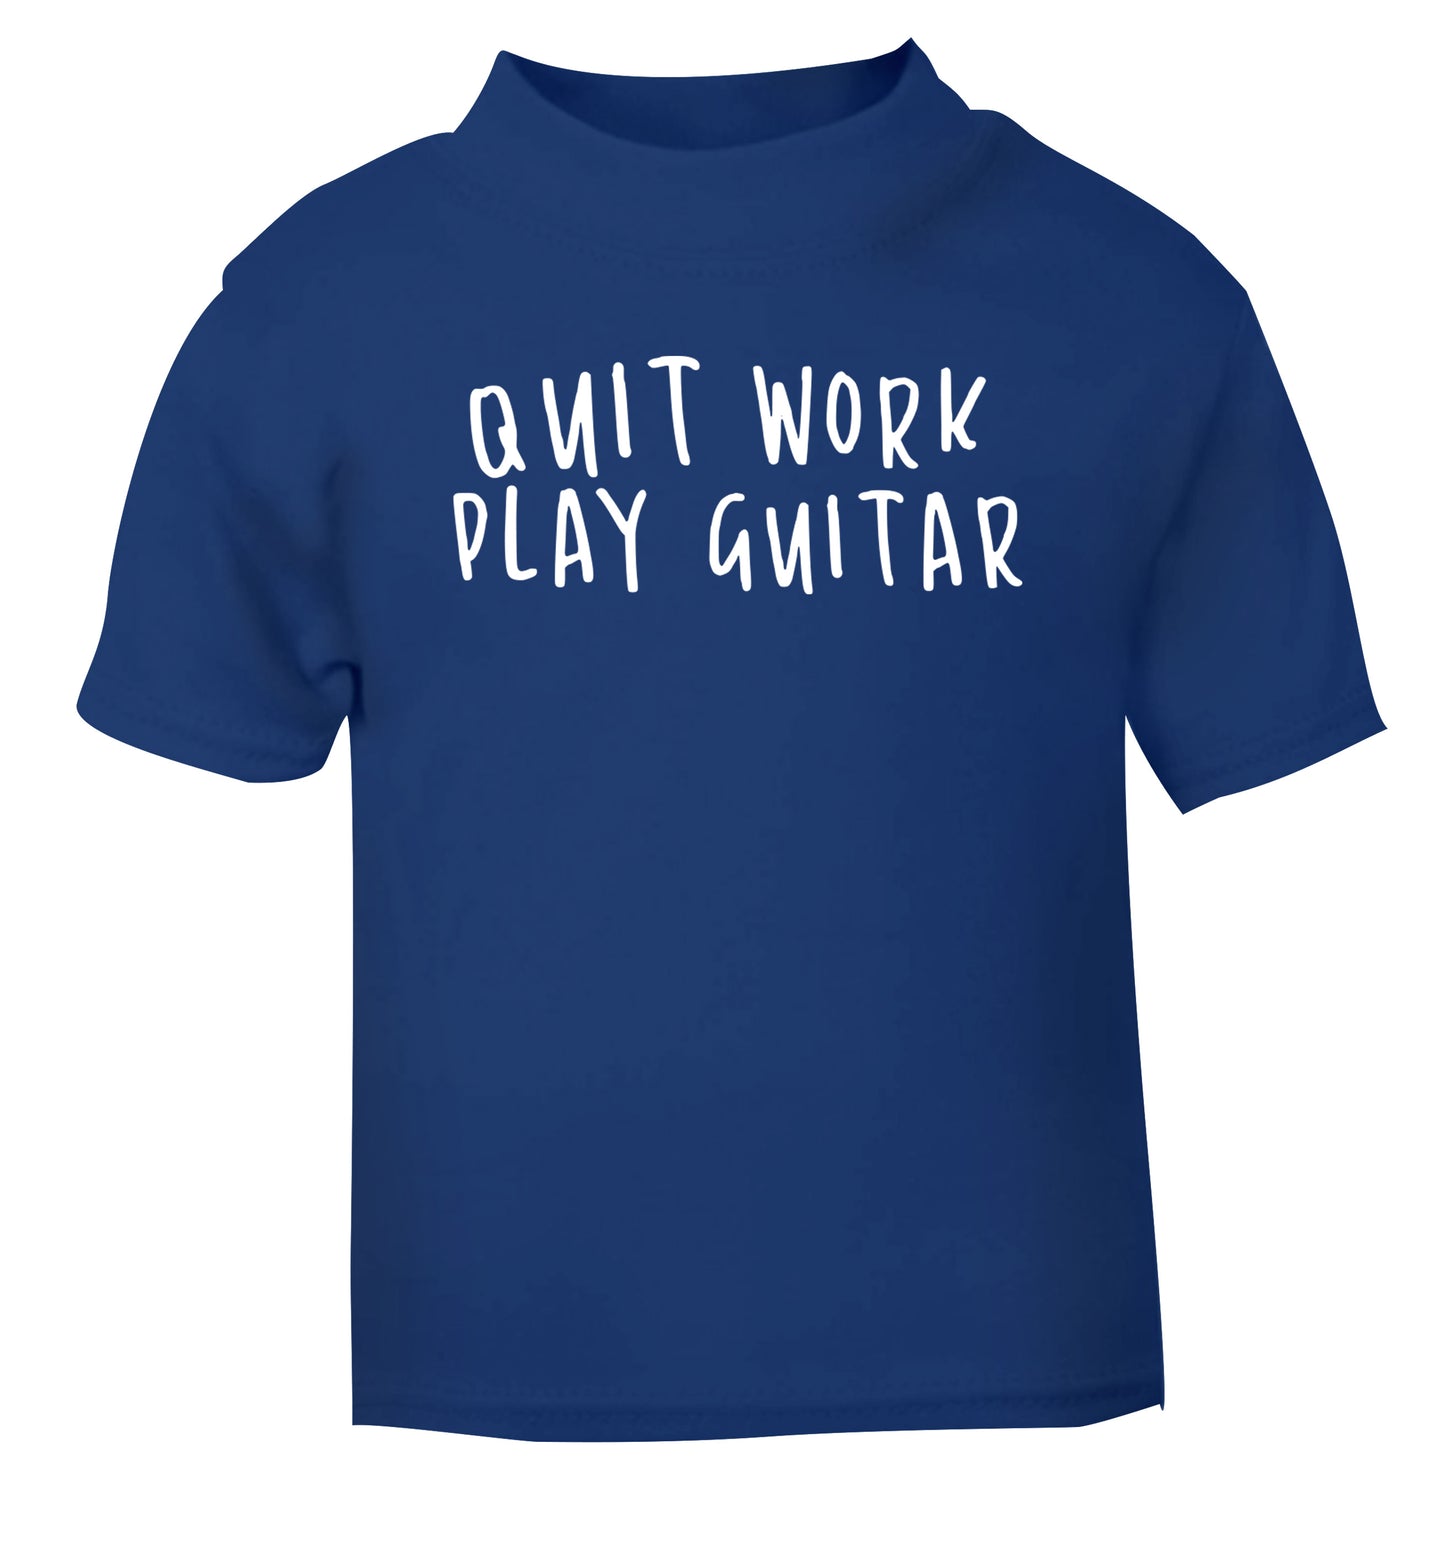 Quit work play guitar blue Baby Toddler Tshirt 2 Years